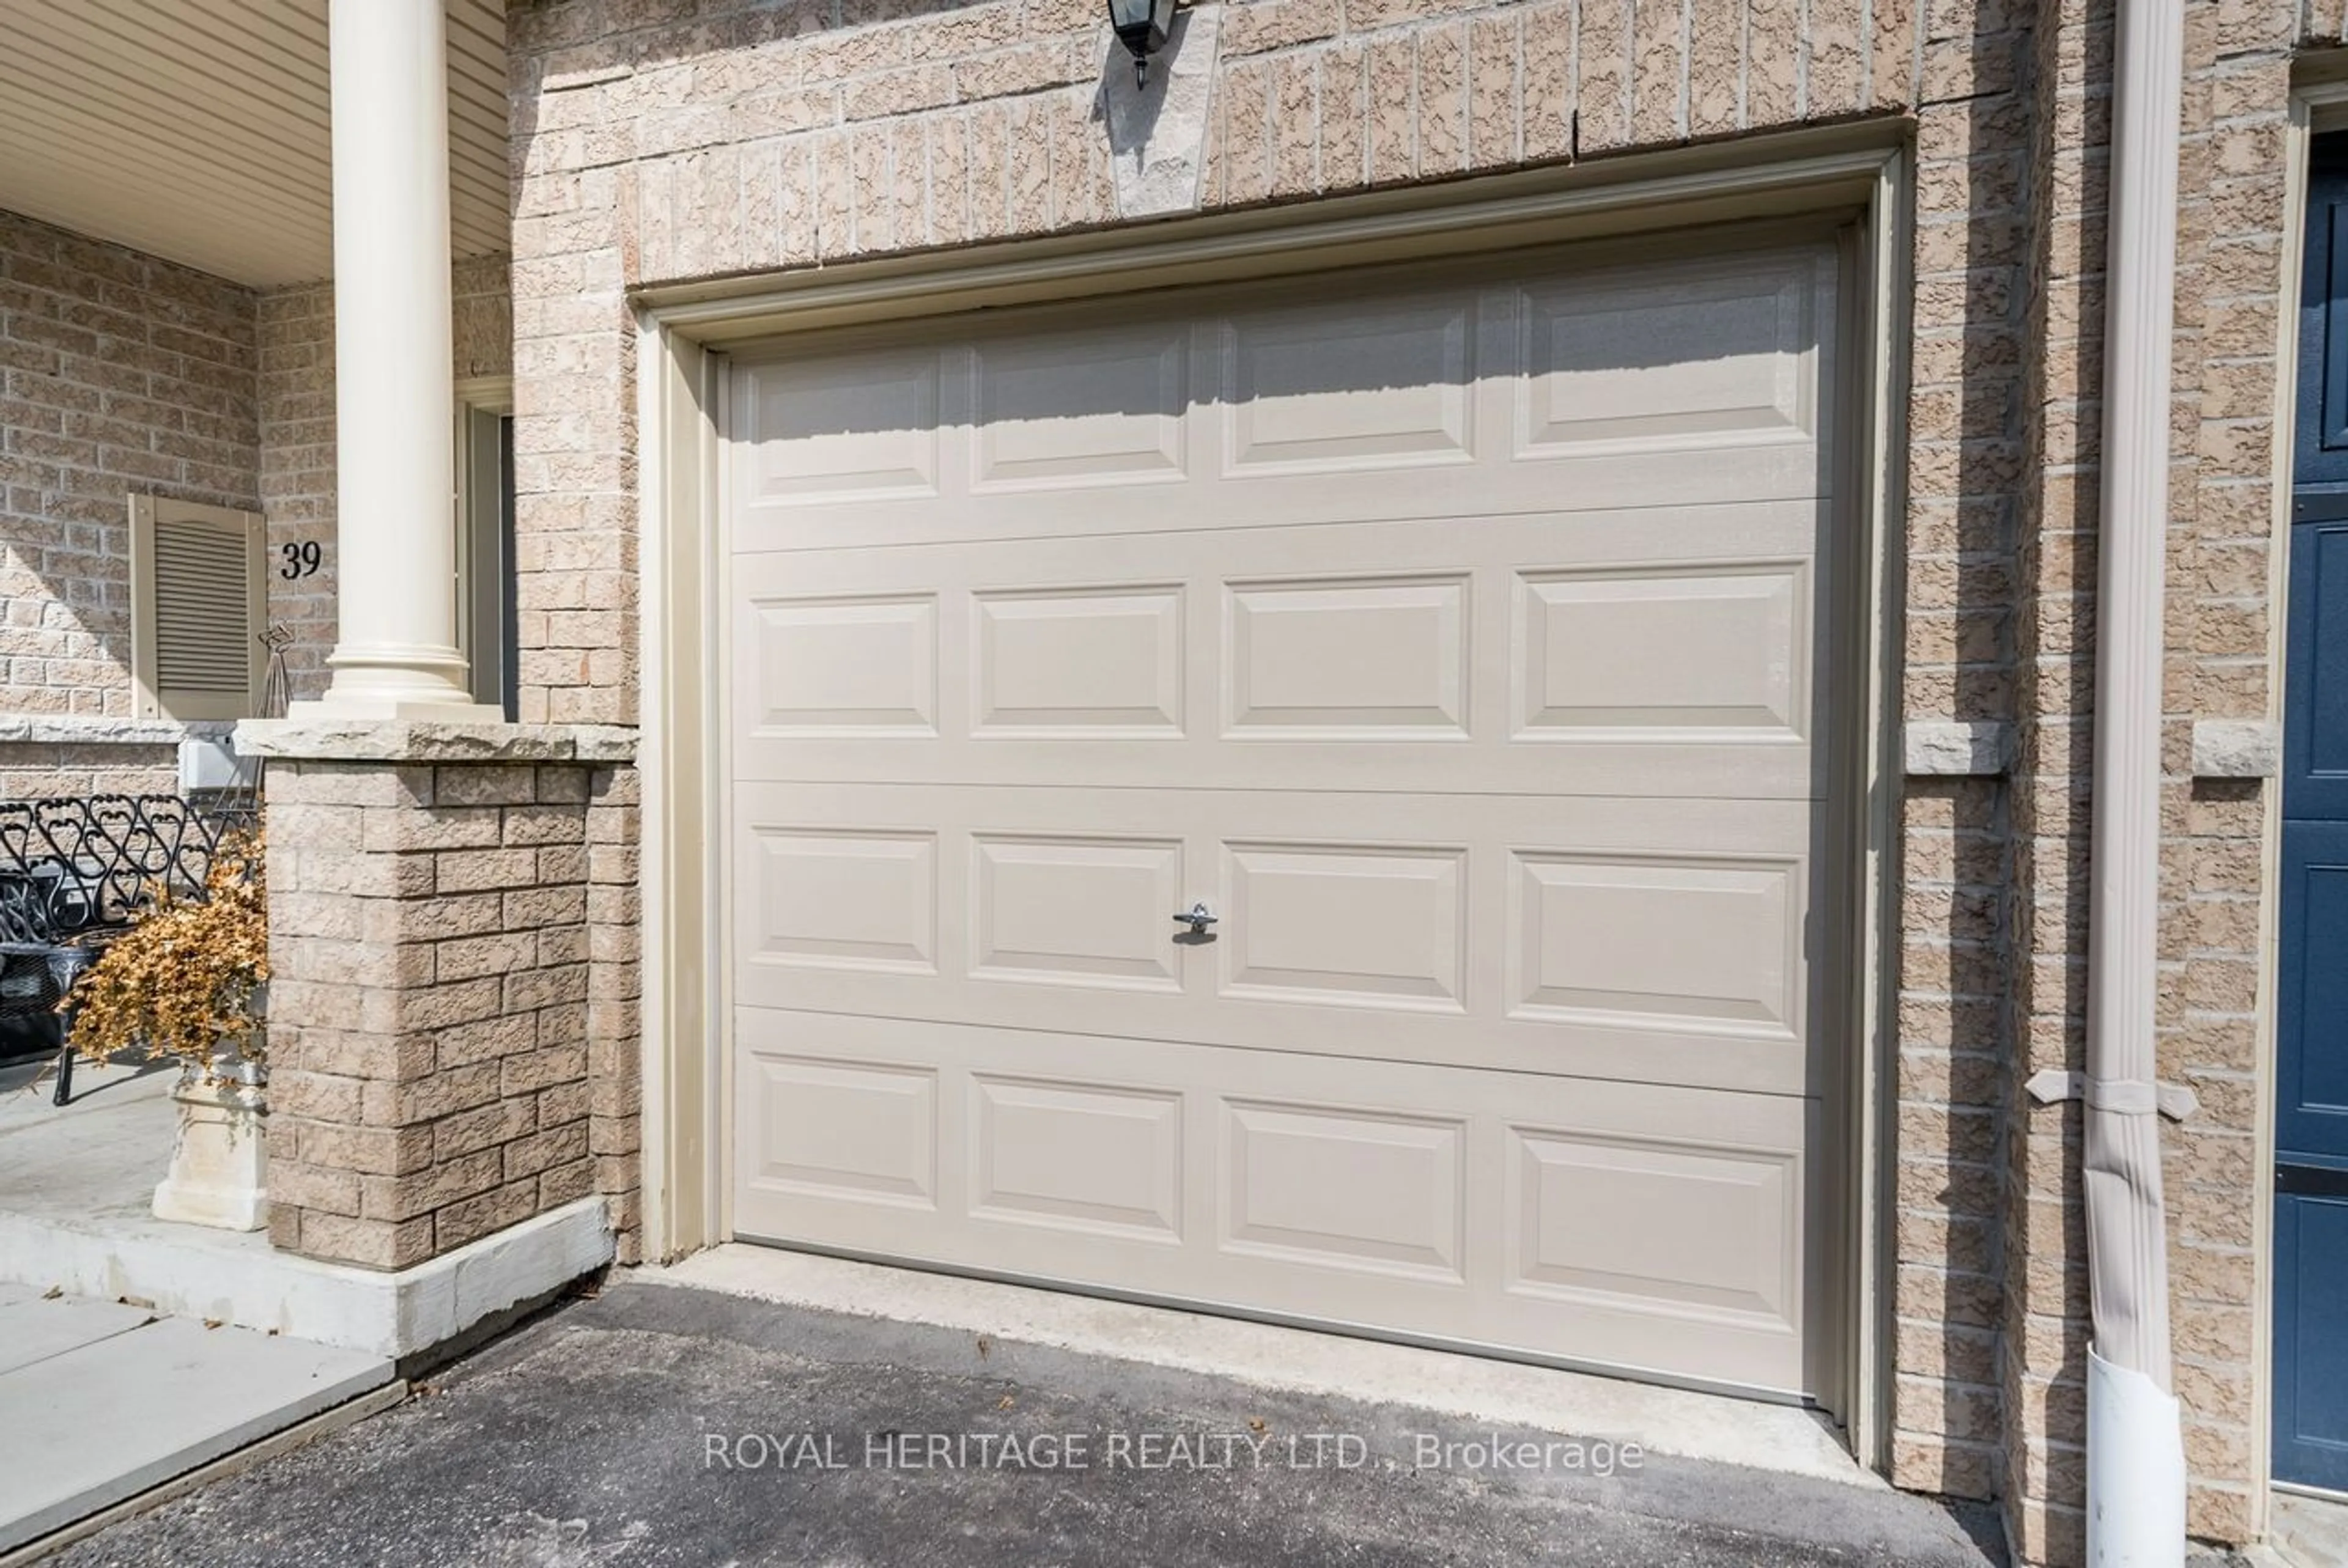 Indoor garage for 39 Tempo Way, Whitby Ontario L1M 0G1